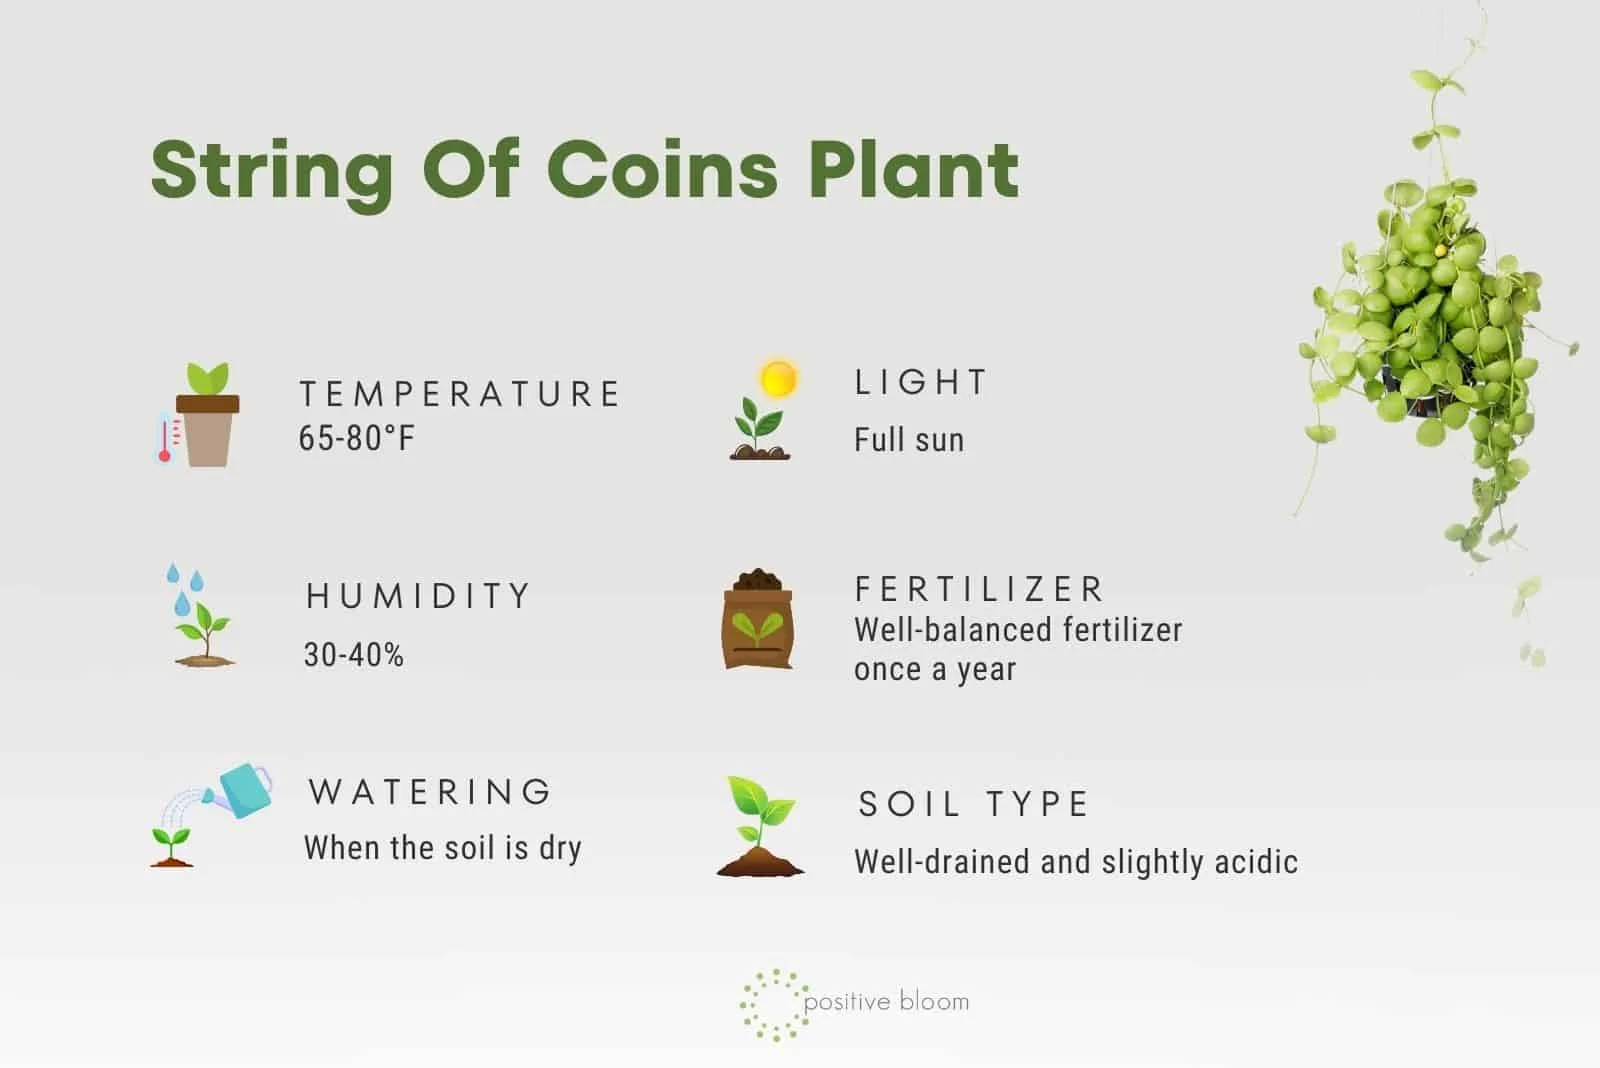 String Of Coins Plant facts